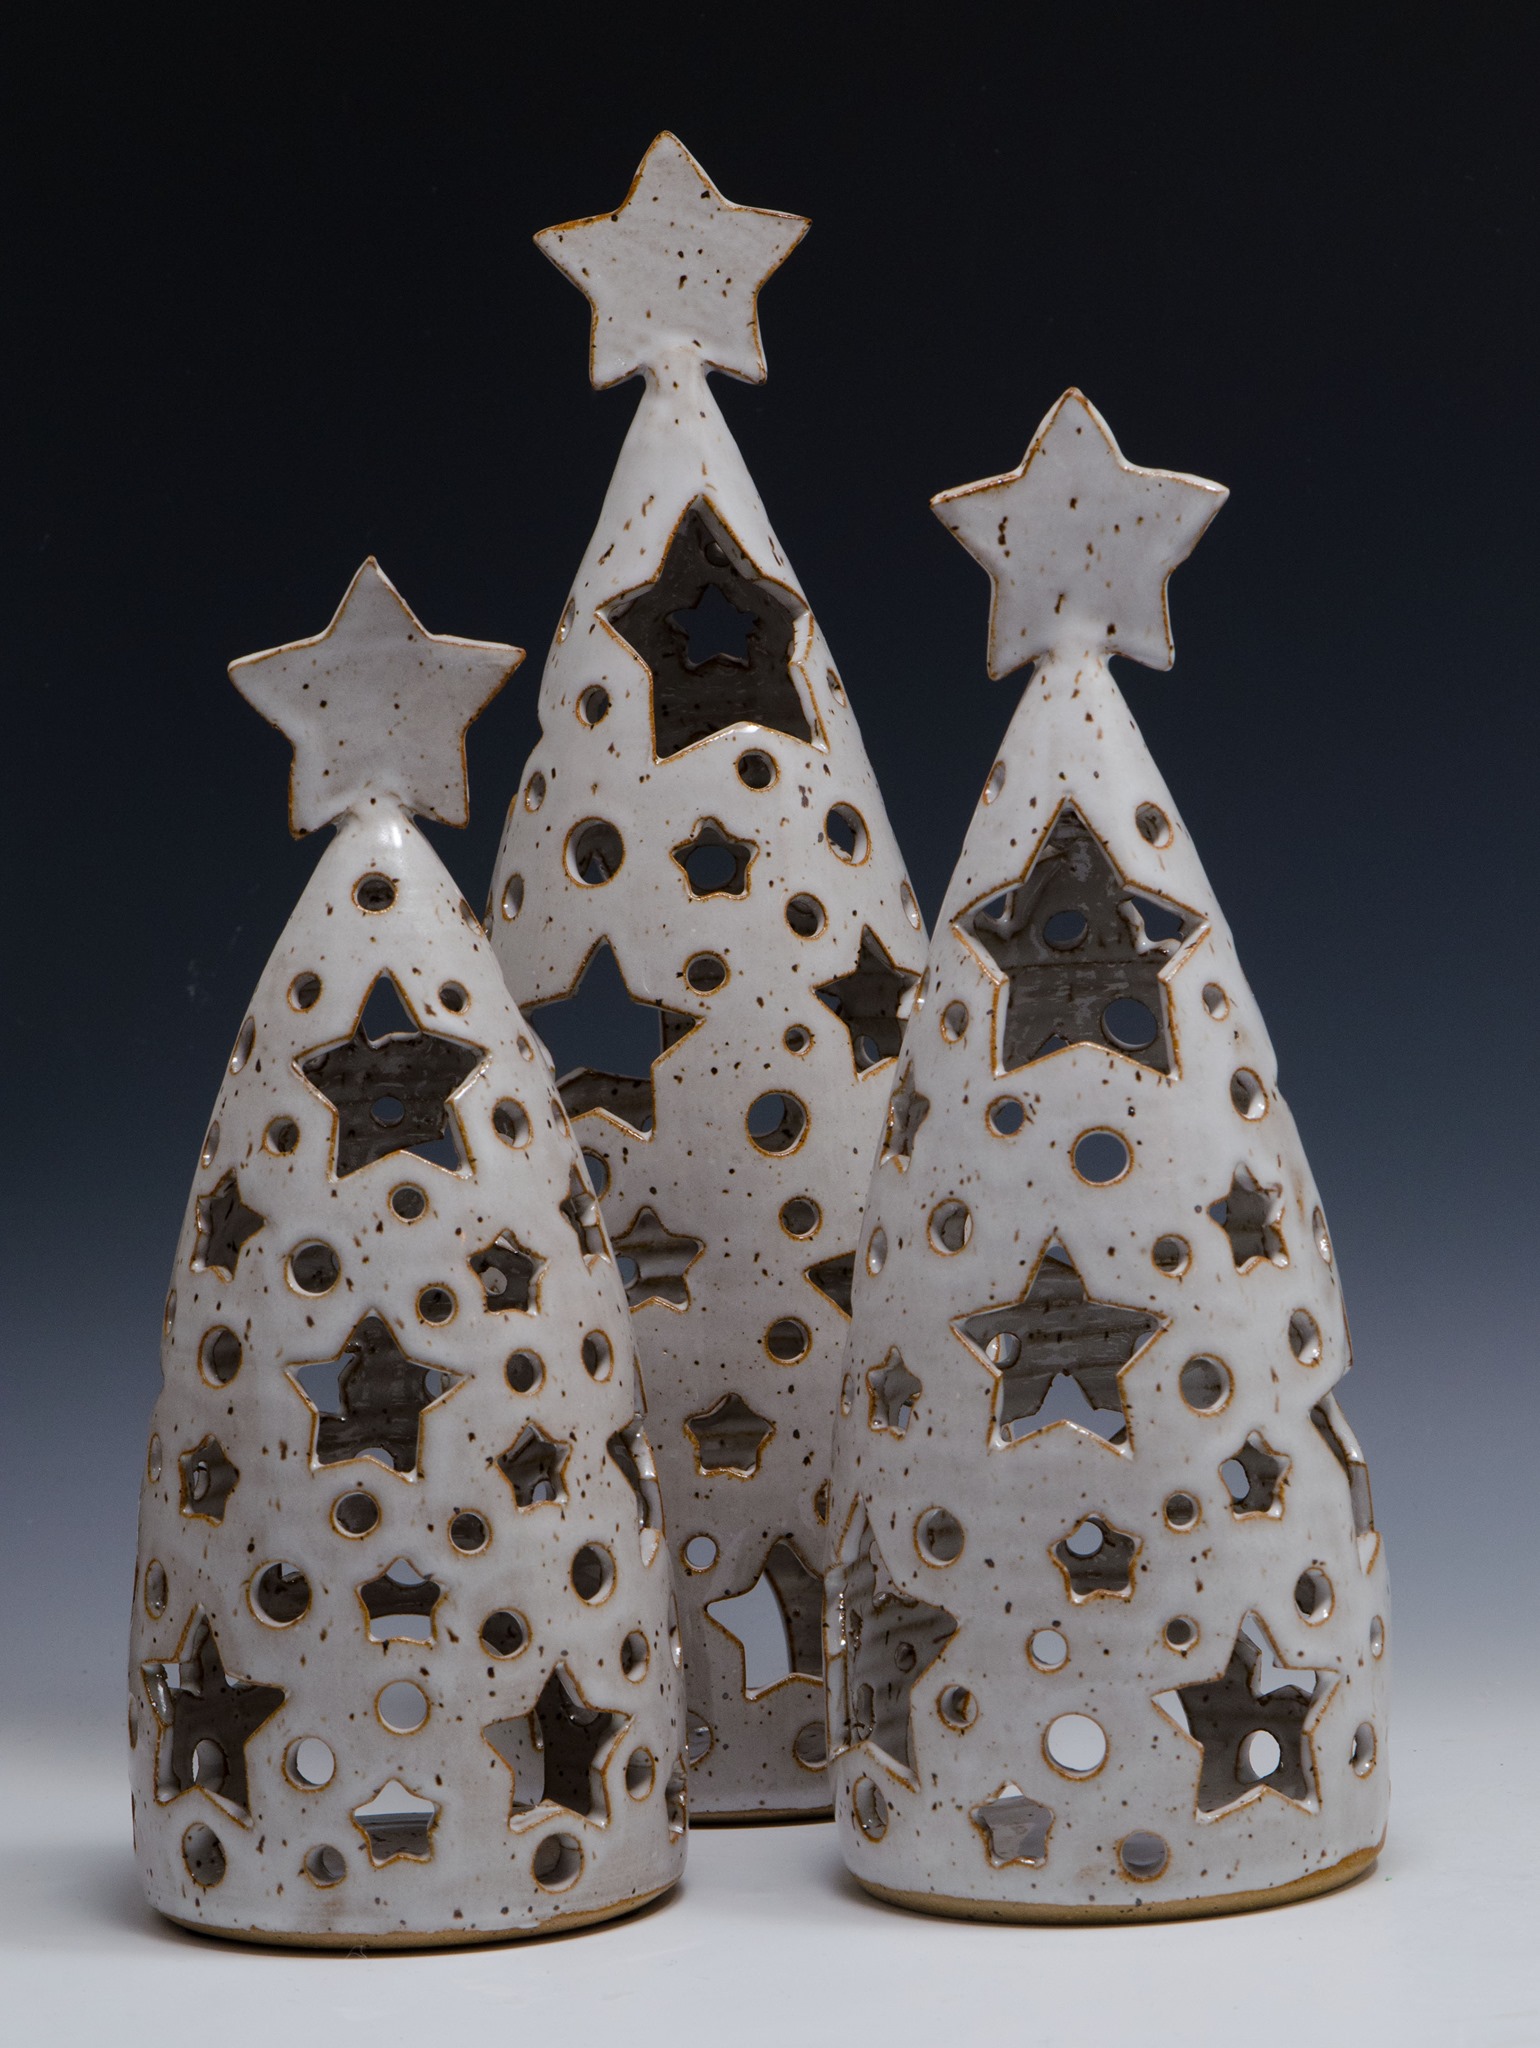 pottery holiday decorations by Michael Kim Burroughs